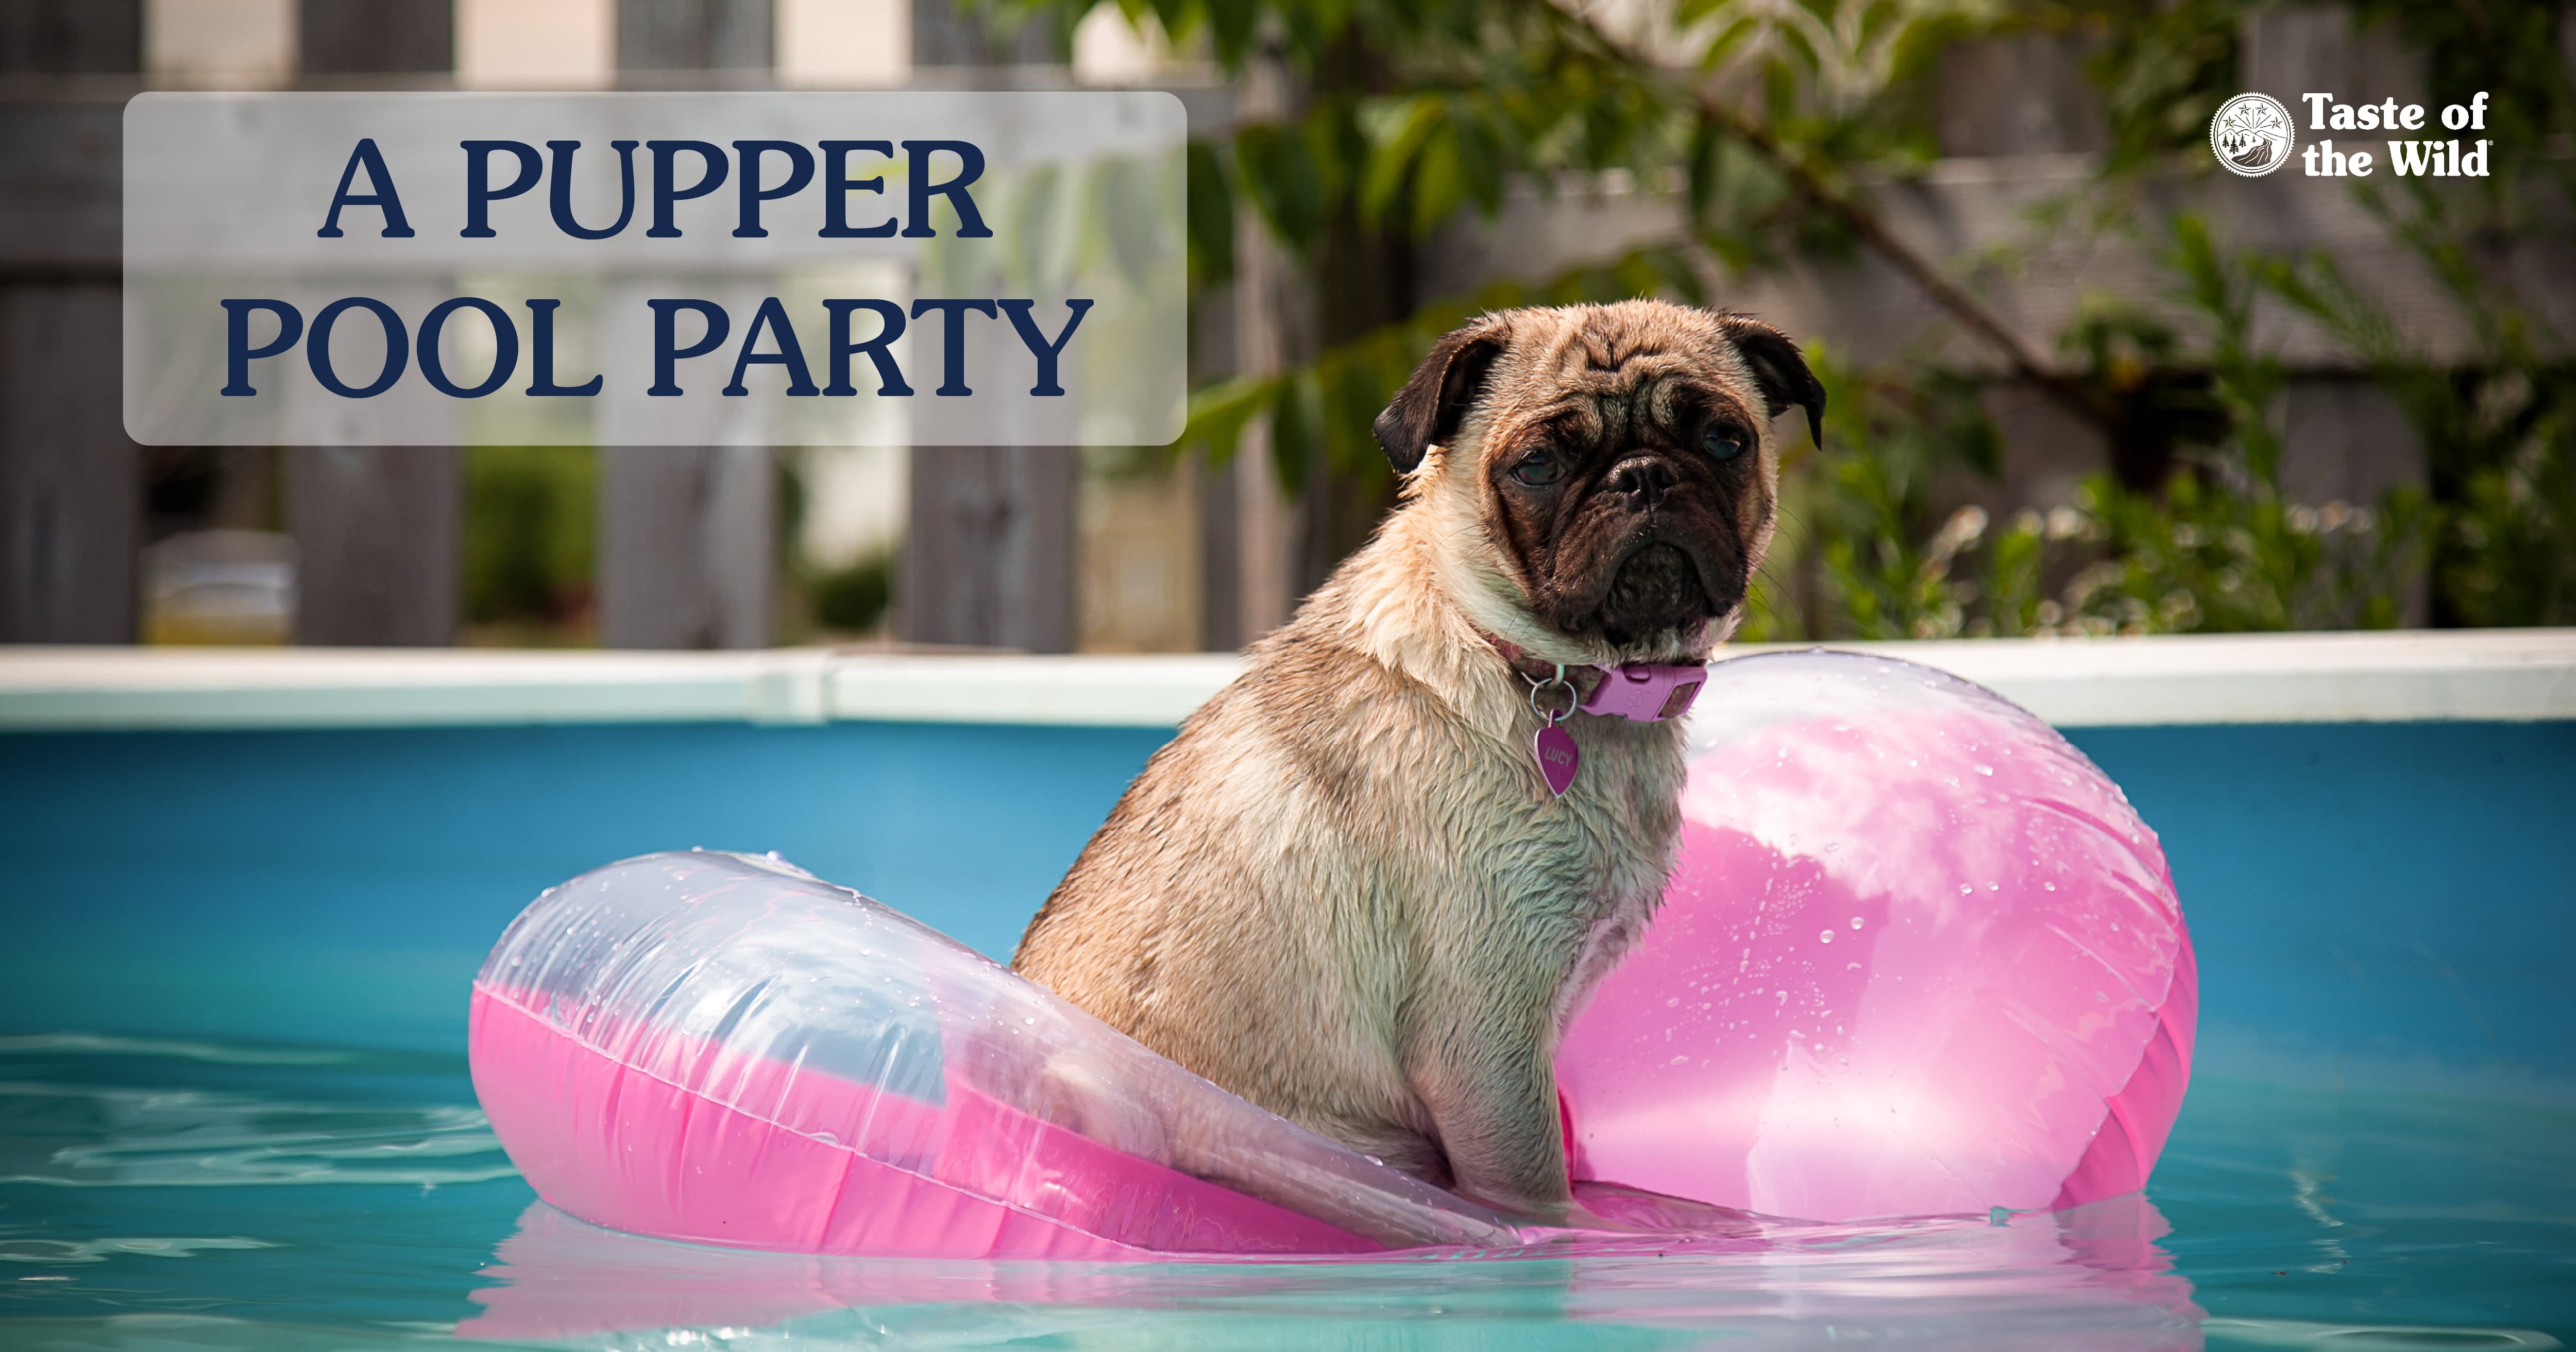 A tan pug standing on a pink flotation raft in a pool.